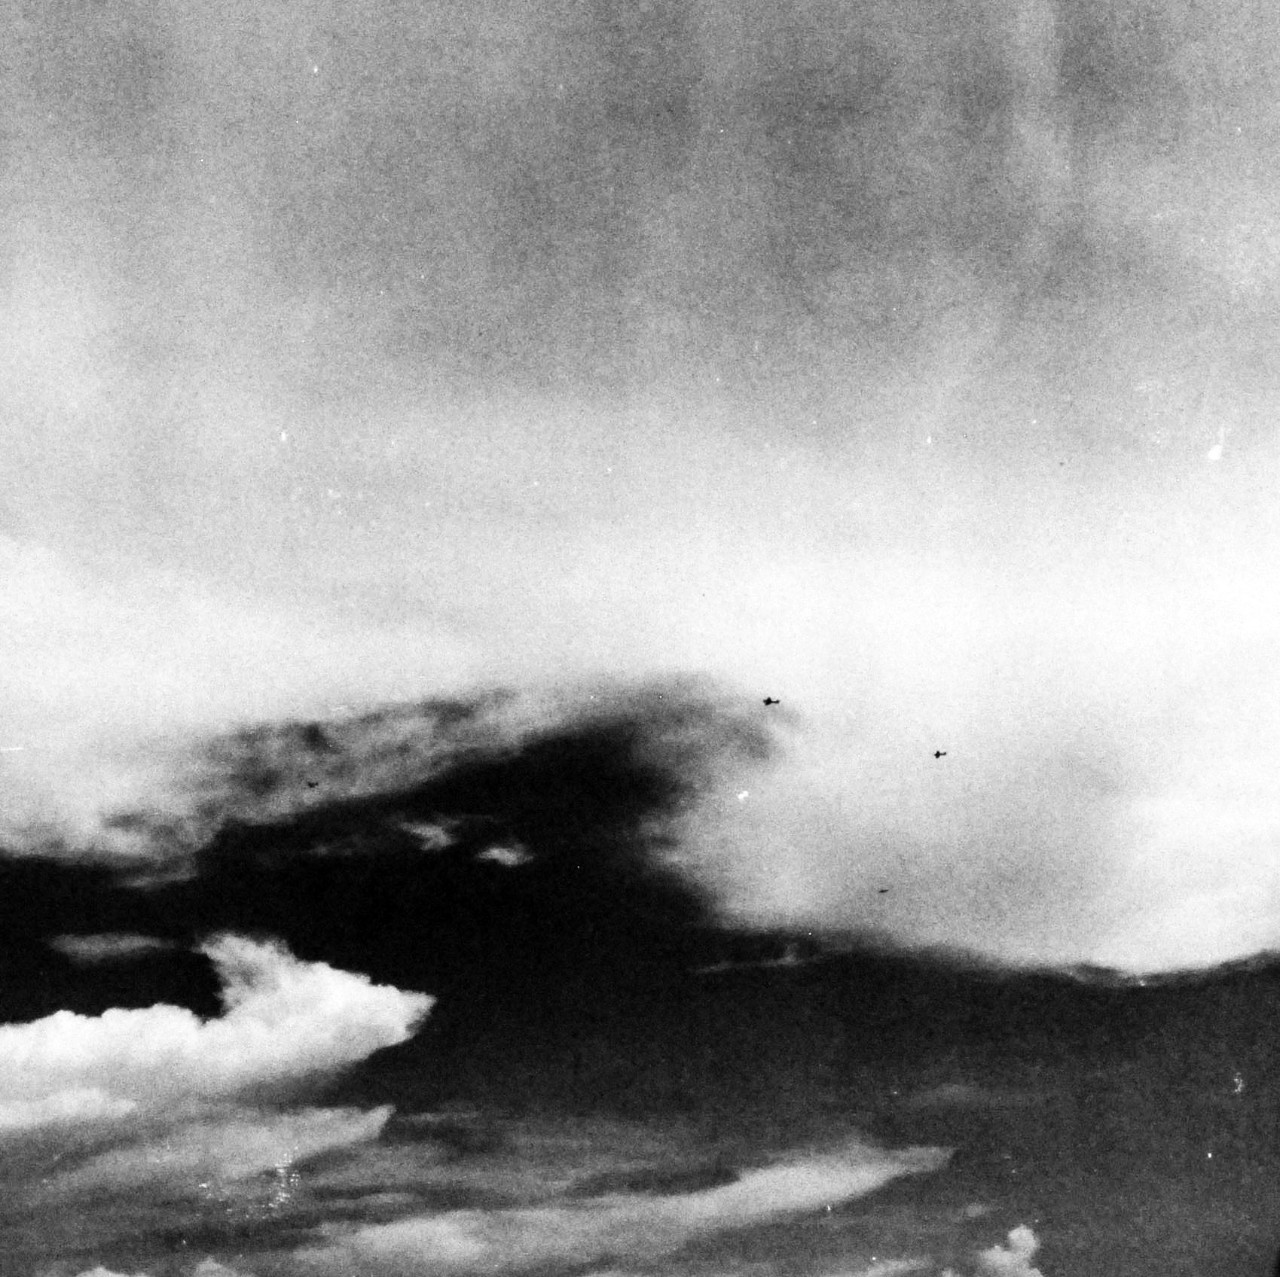 80-G-287528:   USS Kitkun Bay (CVE-71), October 25, 1944.  Japanese fighters break formation to make suicide dives on carrier escorts on US Fleet during the Battle of Leyte Gulf.  As seen from USS Kitkun Bay (CVE-71.  Official U.S. Navy photograph, now in the collections of the National Archives.  